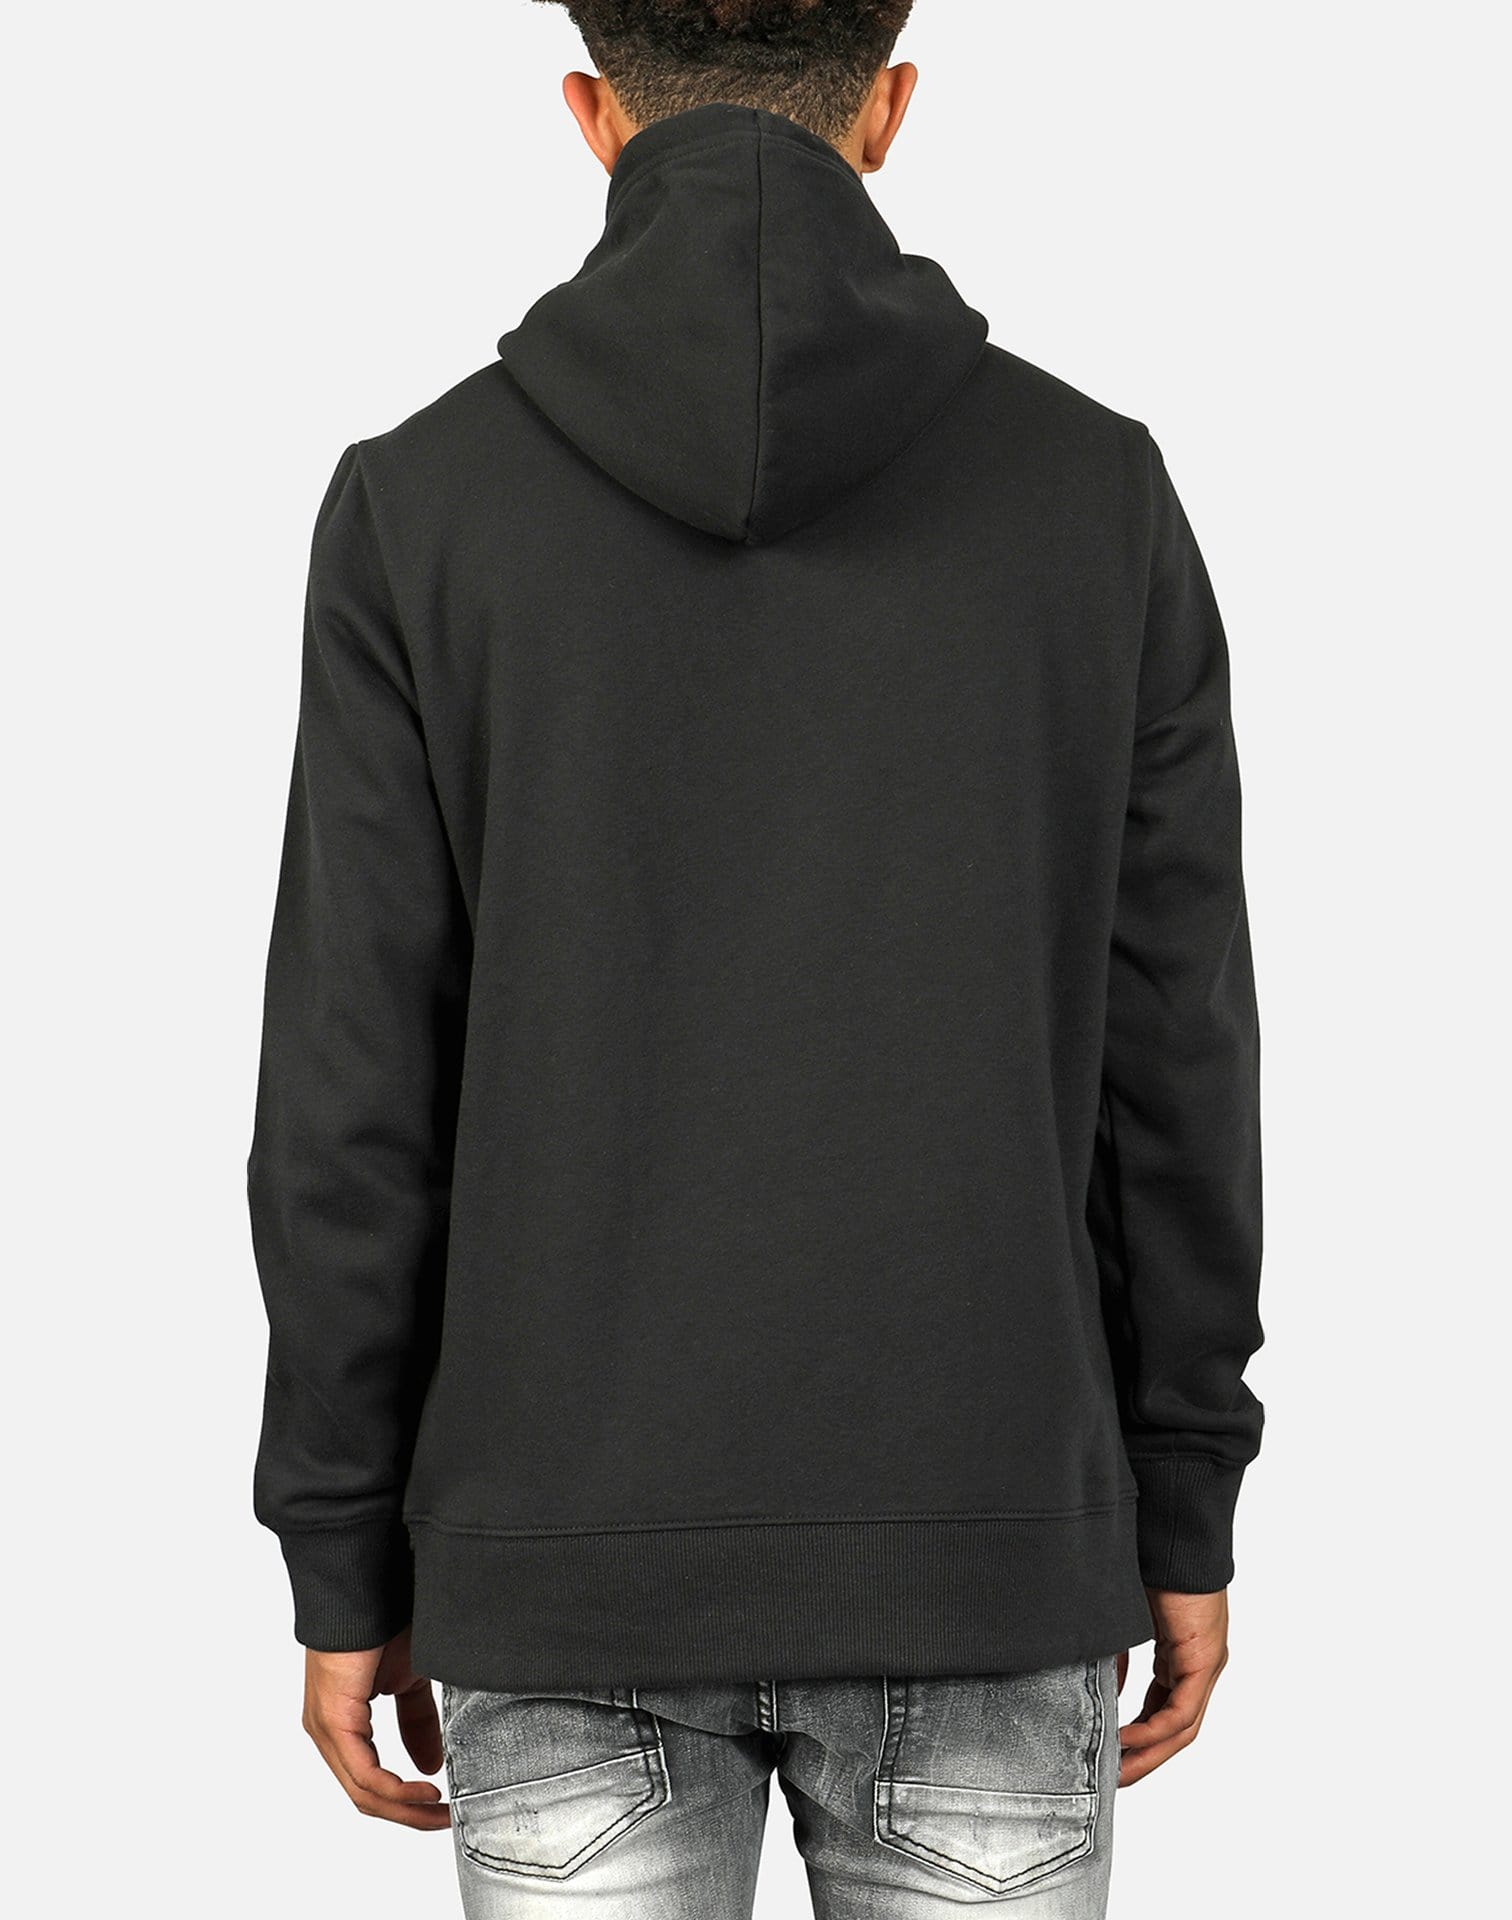 The North Face Men's Edge to Edge Pullover Hoodie